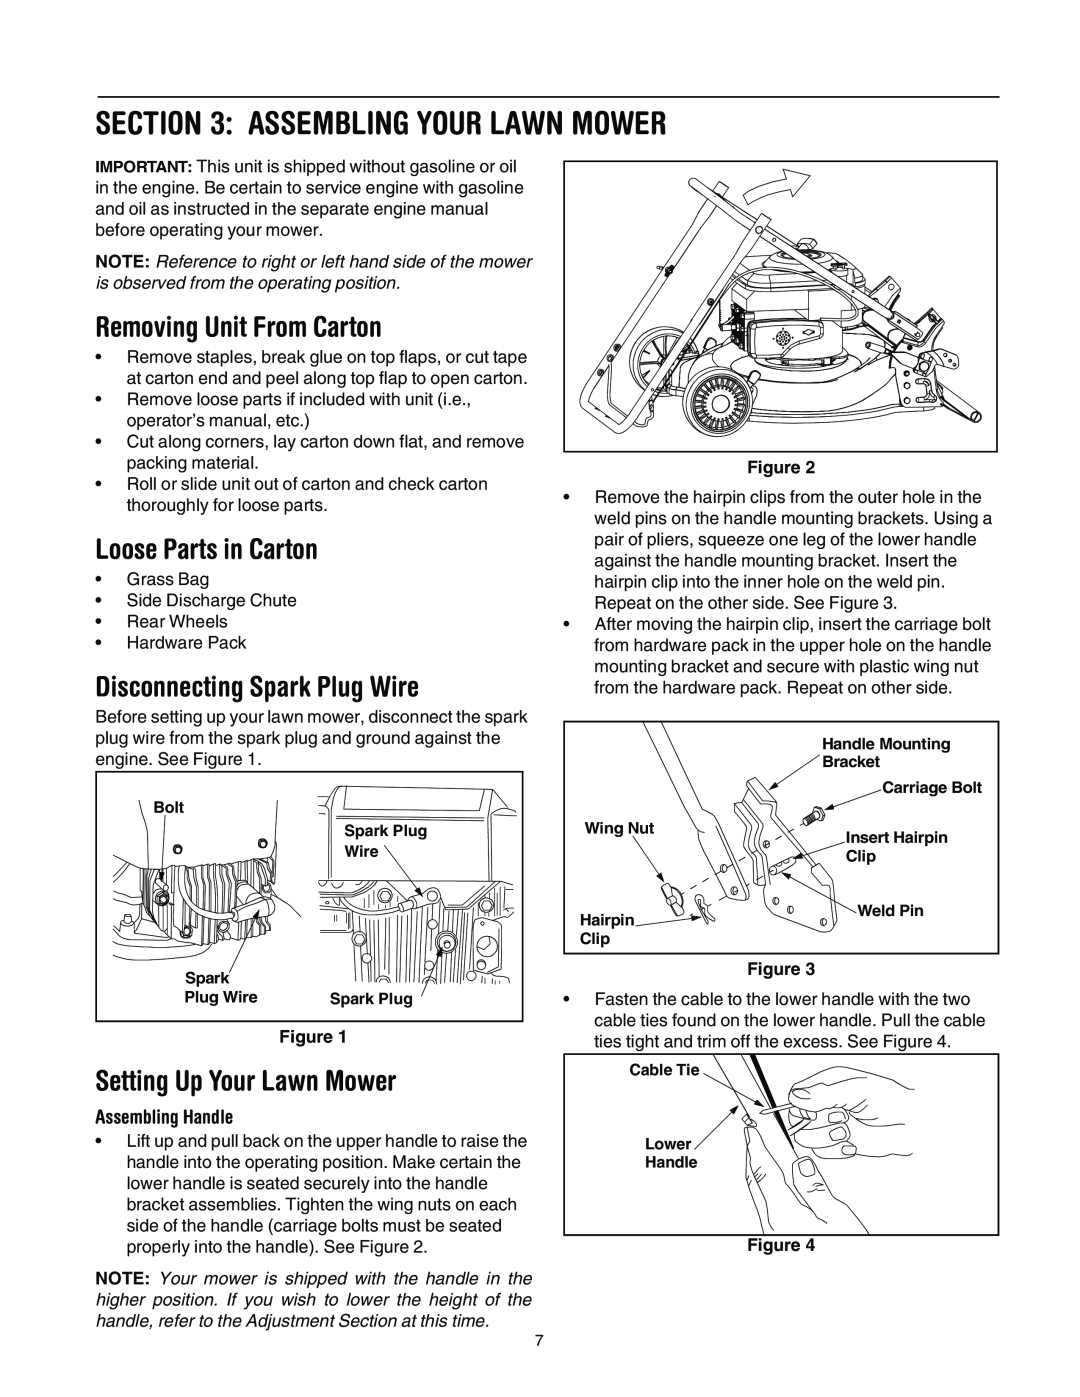 MTD 11A-545D034 Assembling Your Lawn Mower, Removing Unit From Carton, Loose Parts in Carton, Setting Up Your Lawn Mower 